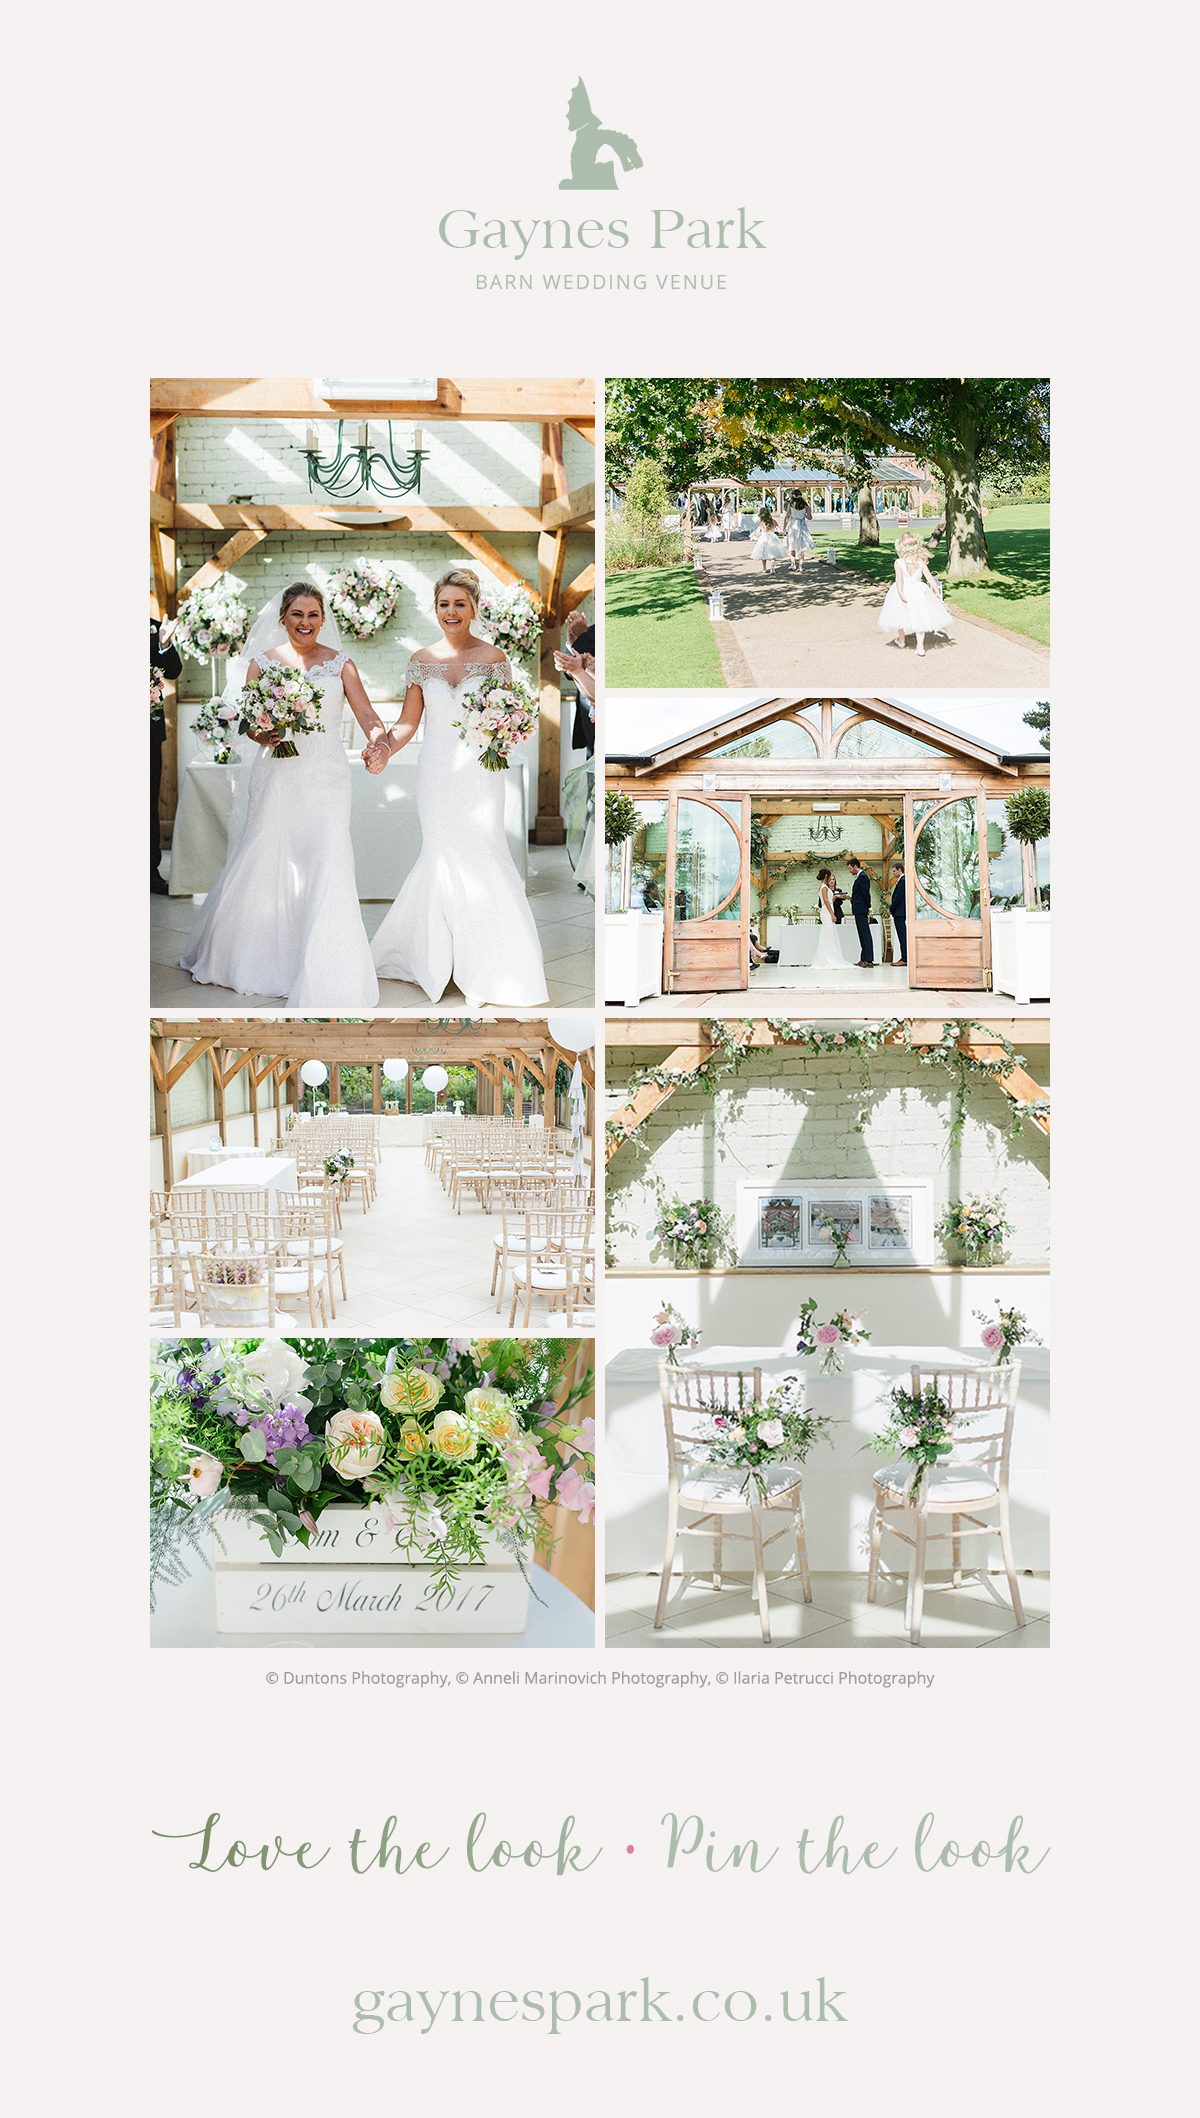 Setting up the Ceremony – All about the Orangery at Gaynes Park